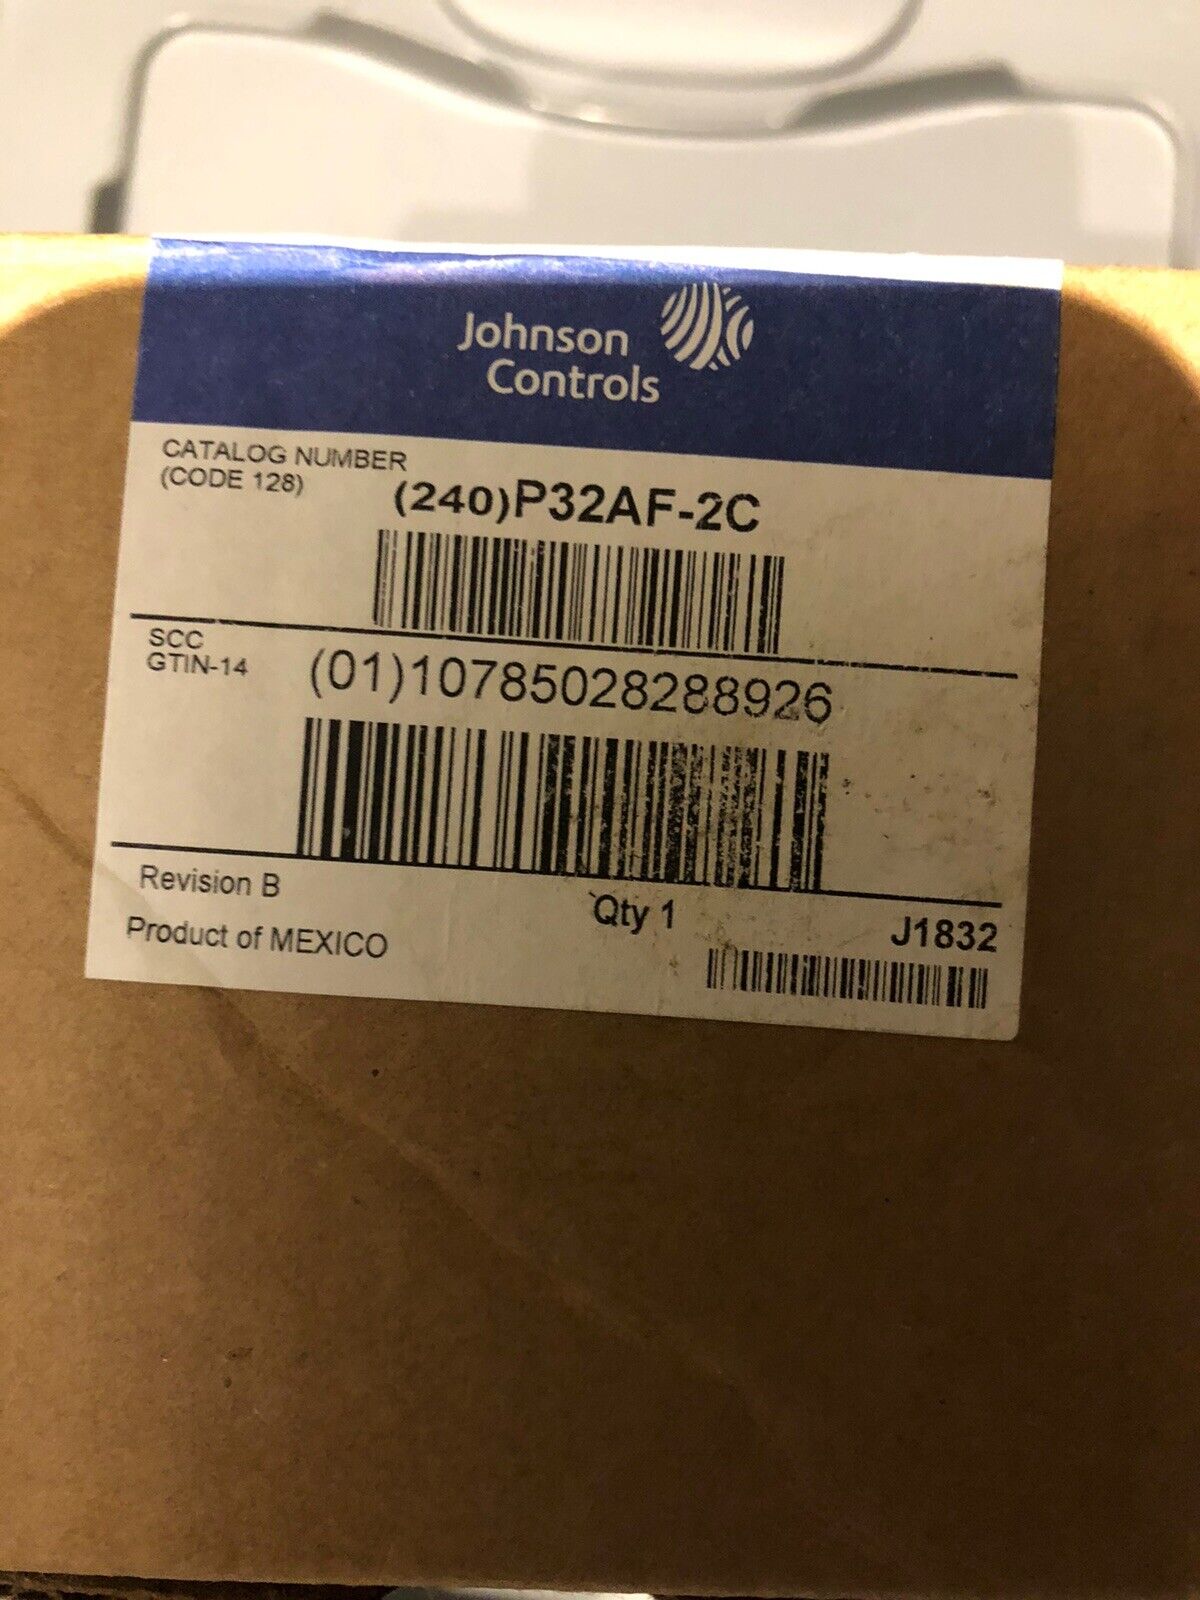 JOHNSON CONTROLS P32AF-2C Differential Air Pressure Switch